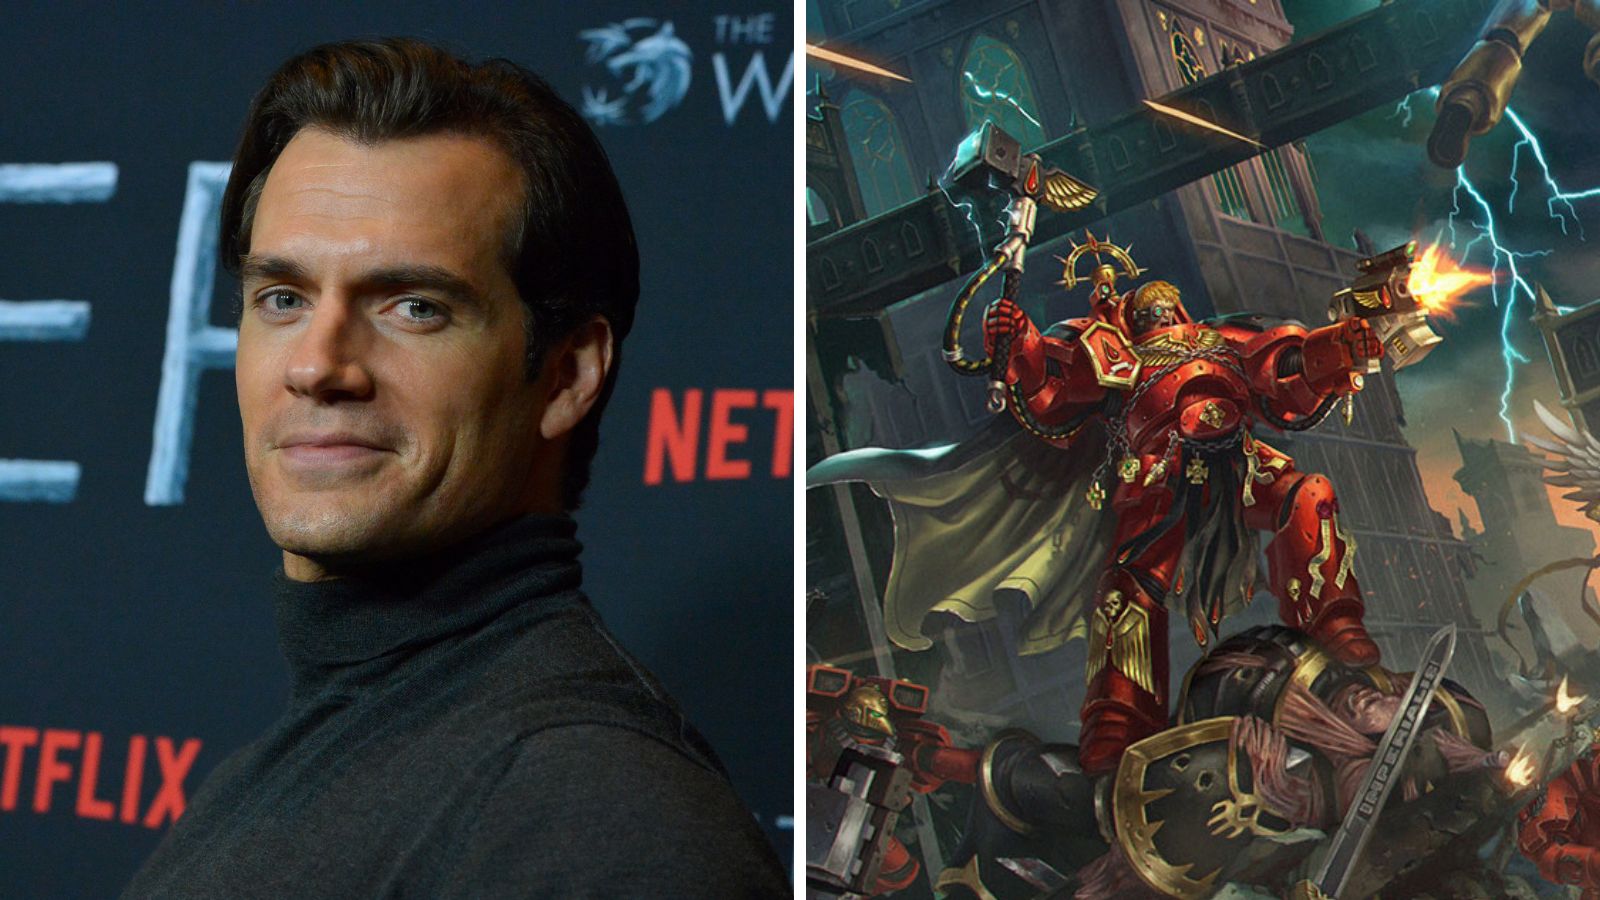 BossLogic is already giving us our best look yet at Henry Cavill in the Warhammer 40K universe